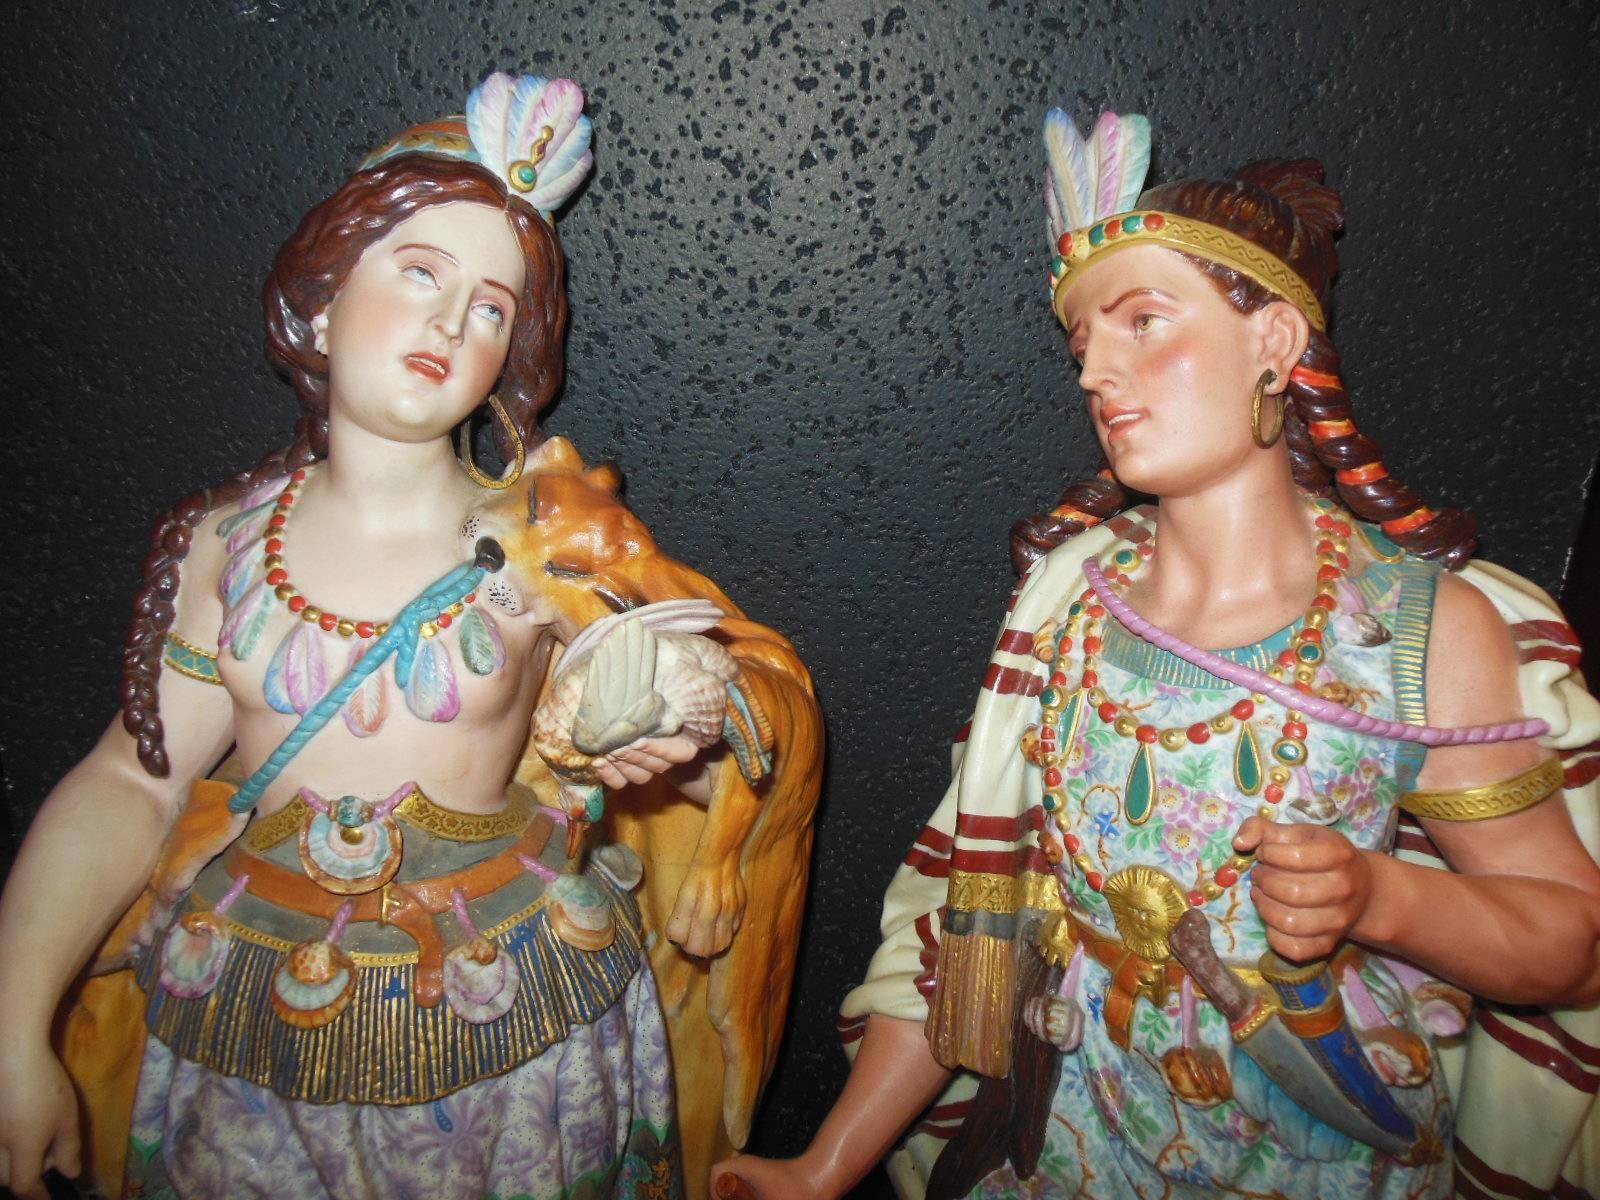 A monumental pair of Native American figurines wearing traditional Indian attire. The French biscuit figurines are colorful and masterfully painted. The condition though not mint is great for their age. The male figure is missing a dagger and the